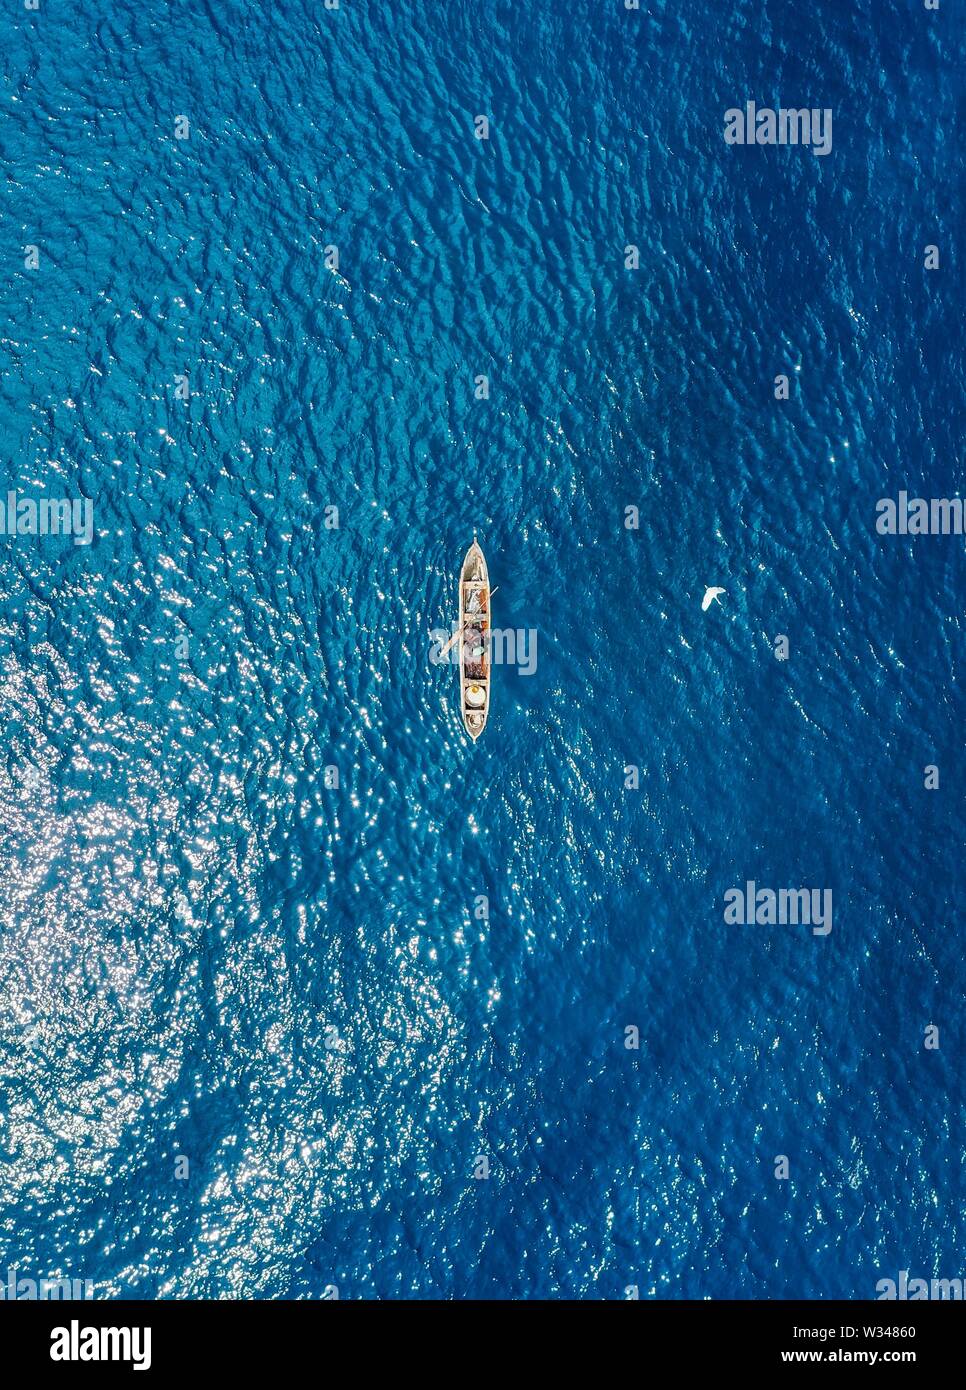 Boat fishing in the deep blue ocean from above Stock Photo